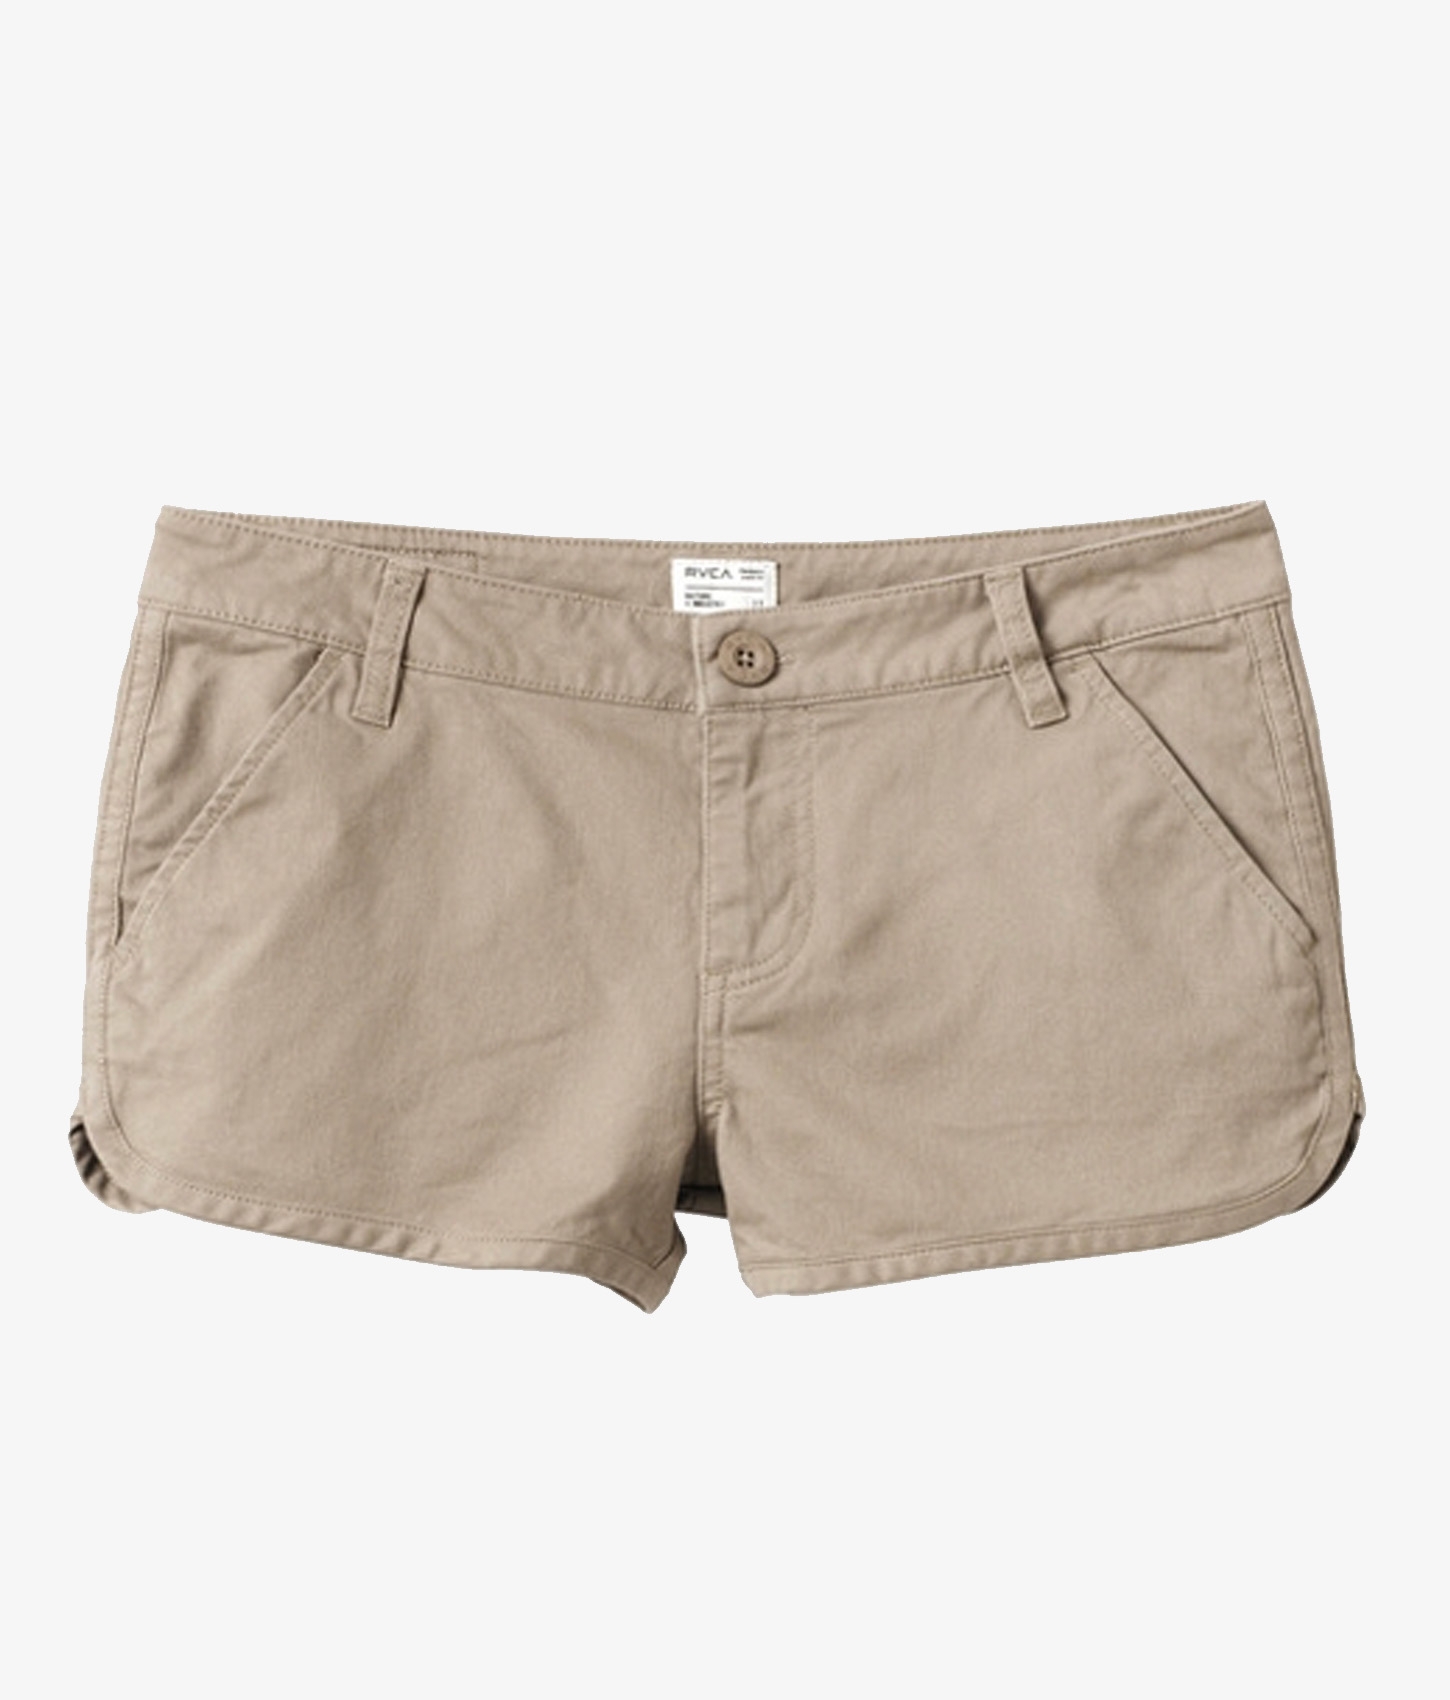 RVCA Downtowner Shorts